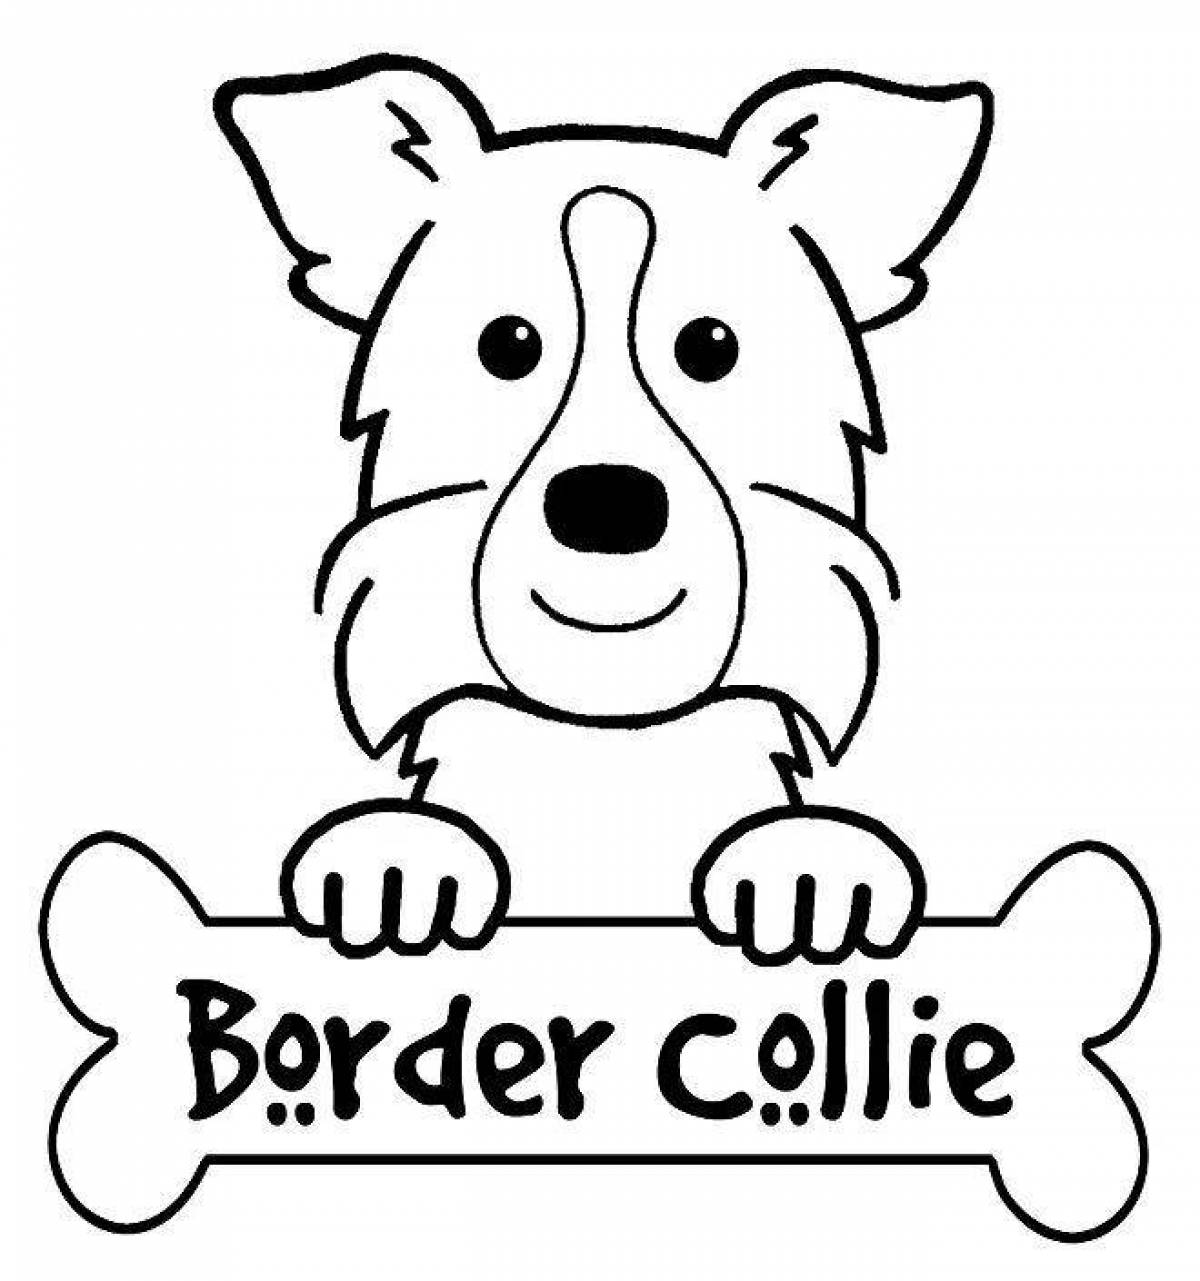 Coloring page brave border collie